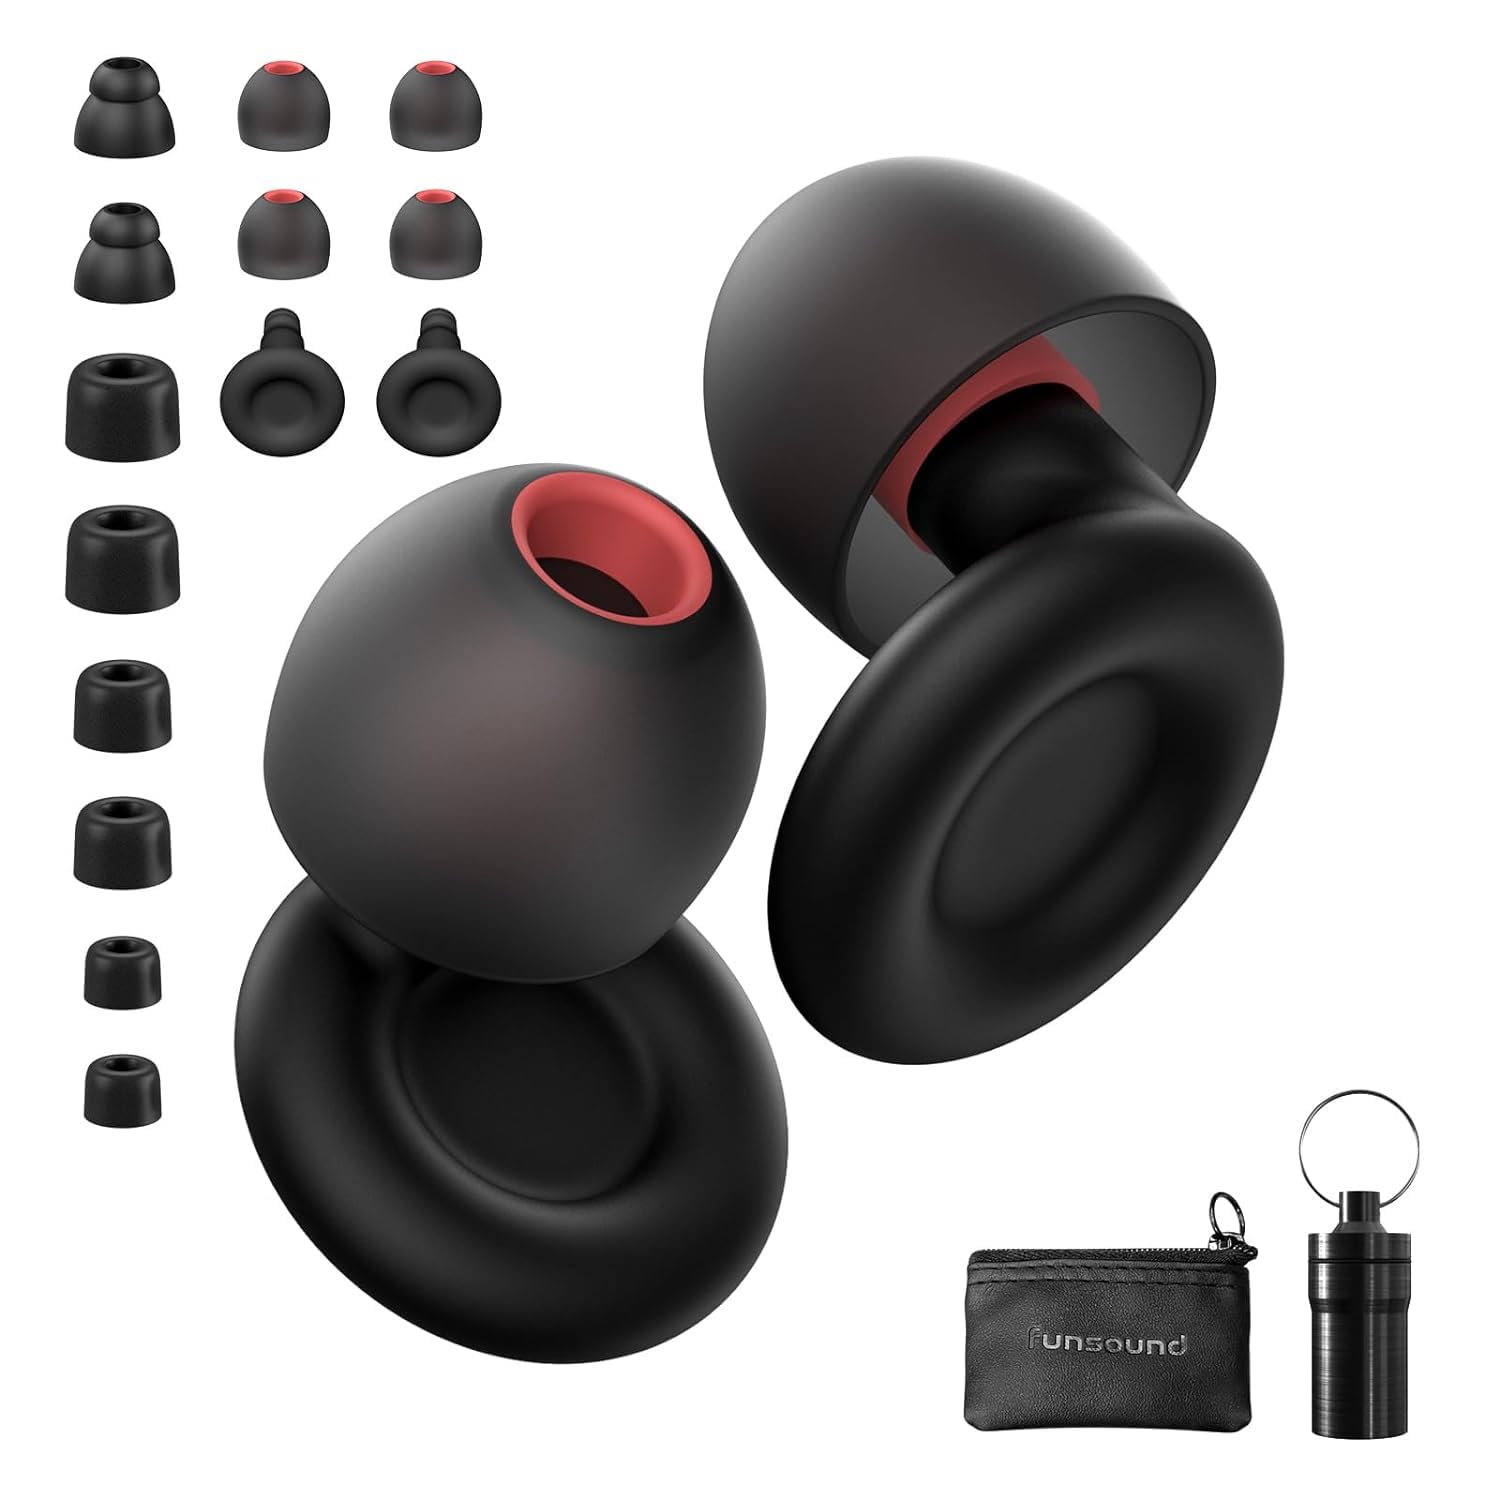 Ear Plugs for Sleeping Noise Reduction Reusable, Concerts, Focus, Travel, Work, High Fidelity – 7 Pair Eartips – Flexible Soft-Touch – NRR of 24 and 27 dB Noise Cancelling Black Red